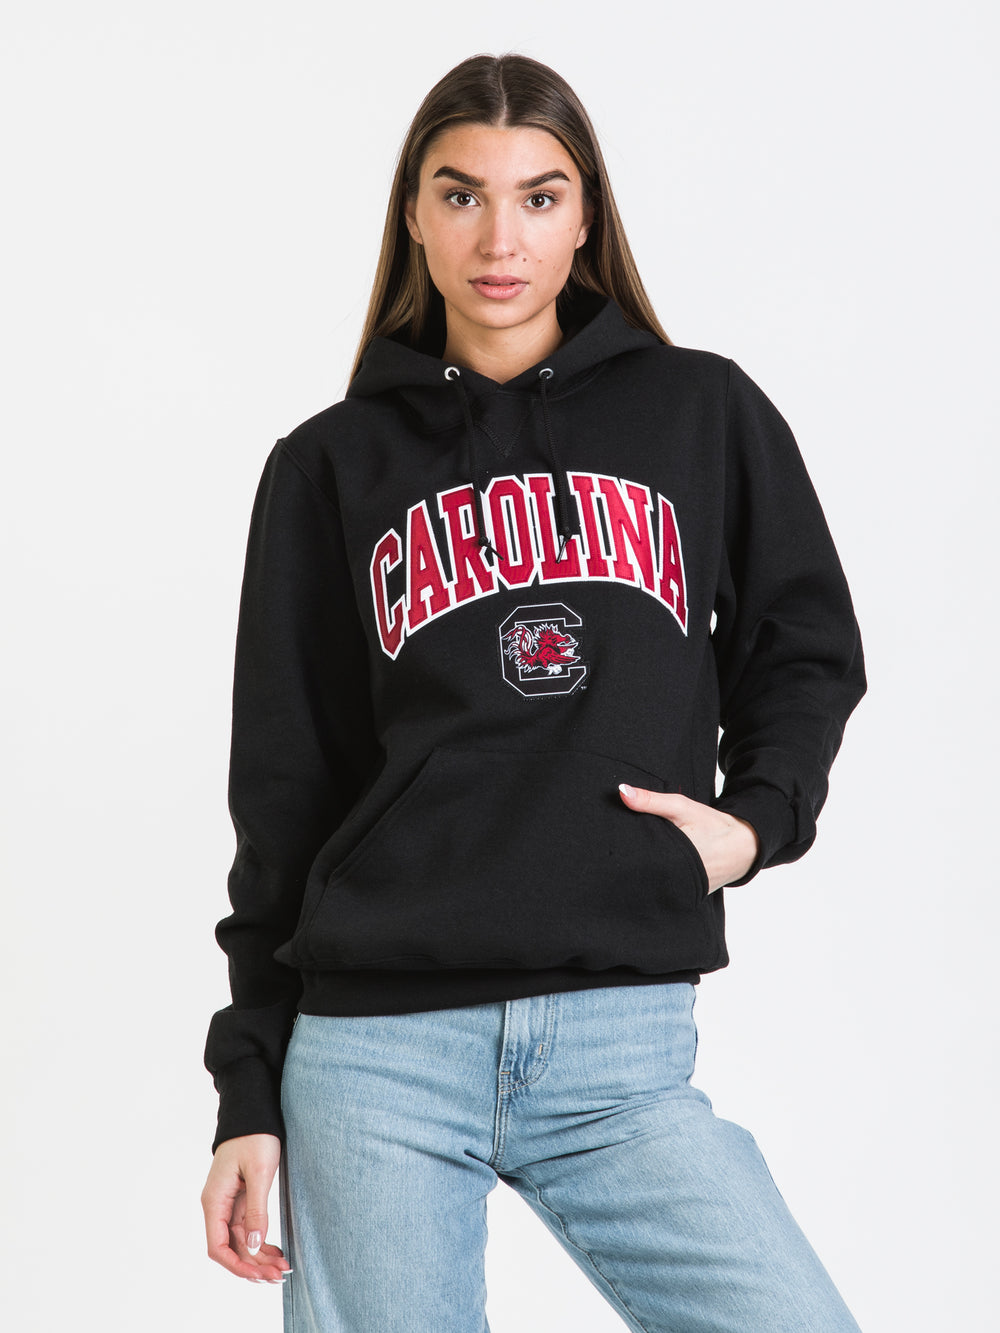 RUSSELL SOUTH CAROLINA PULLOVER HOODIE - CLEARANCE